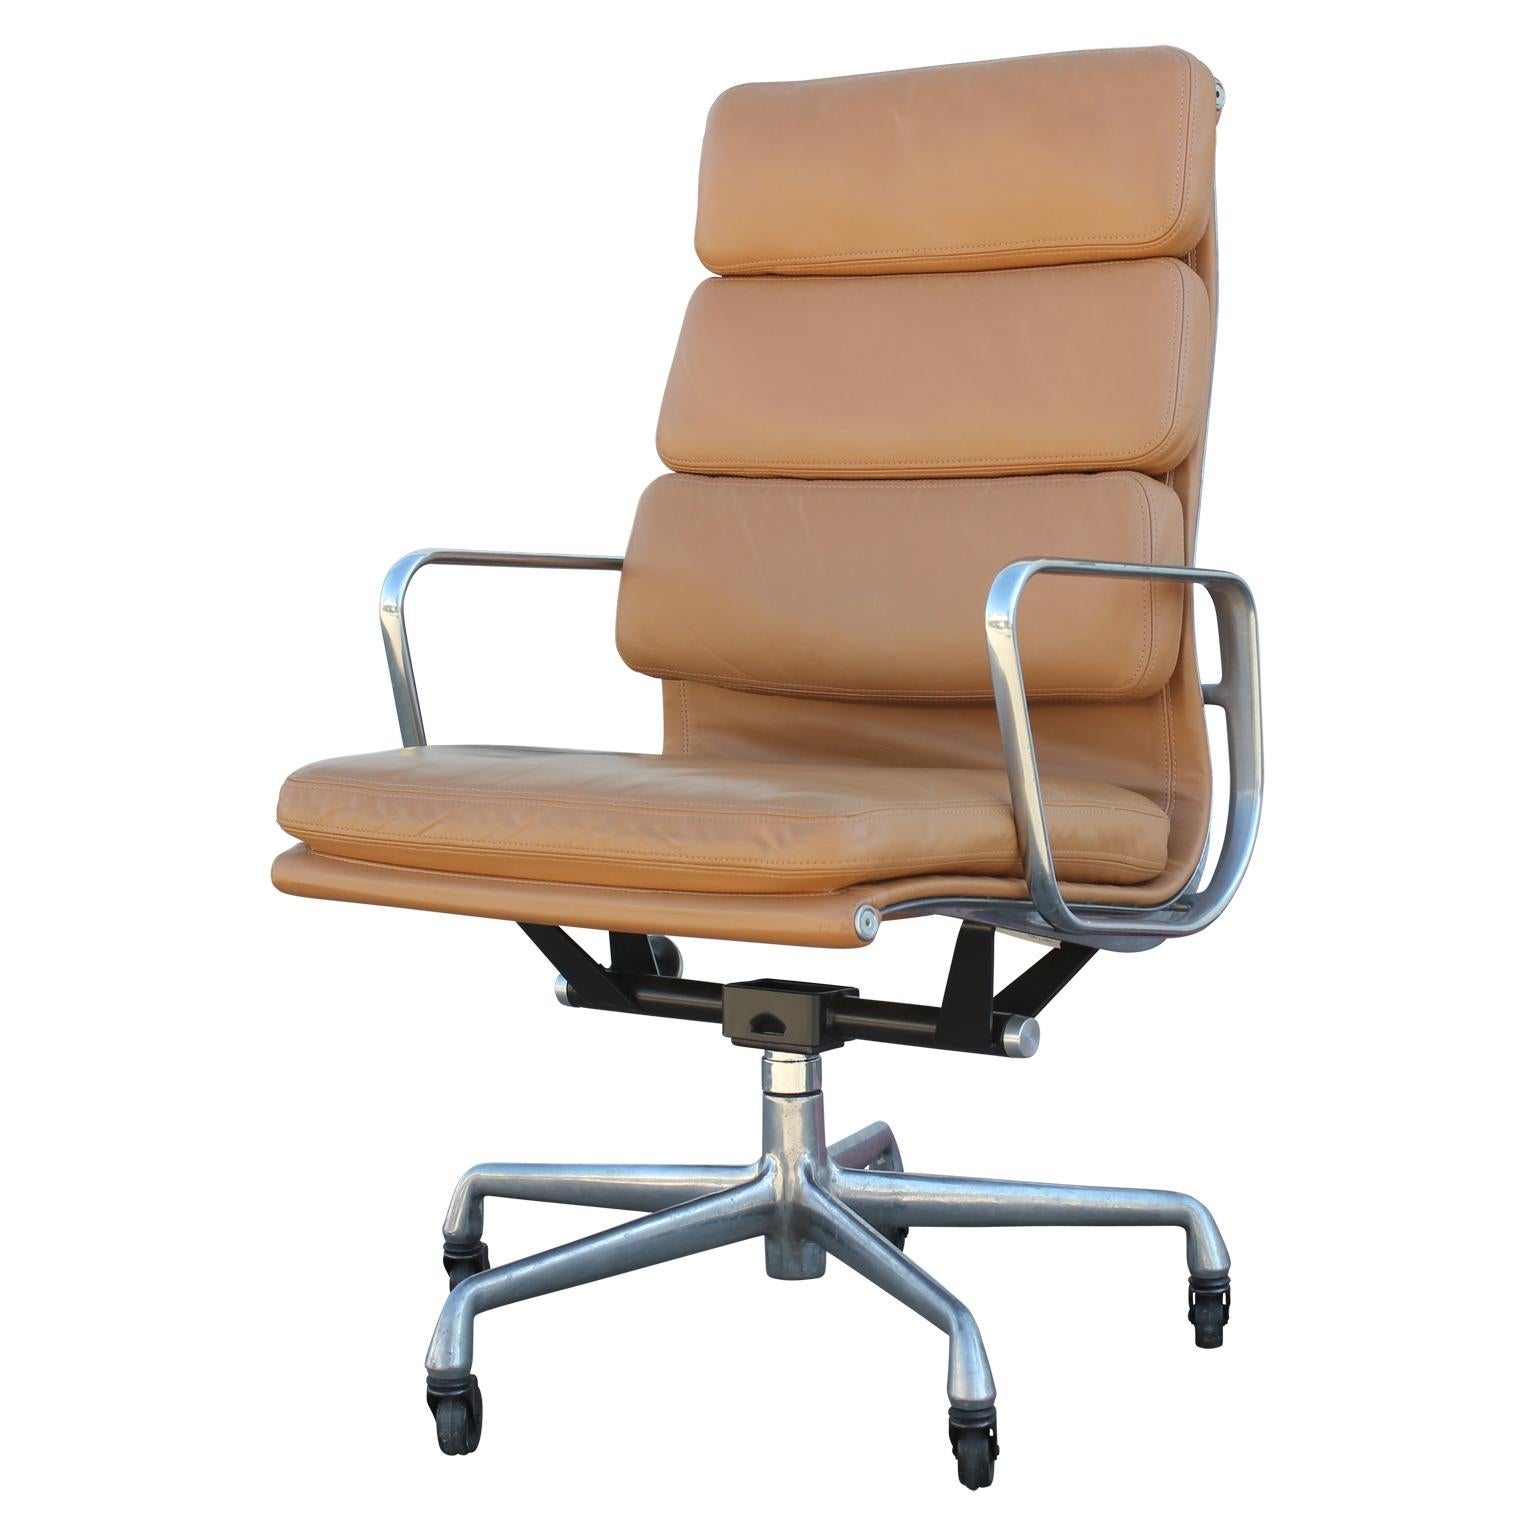 Gorgeous modern soft pad executive desk chairs with a high back and on casters designed by Charles Eames for Herman Miller's Aluminum Group line. We have up to 4 available for purchase.